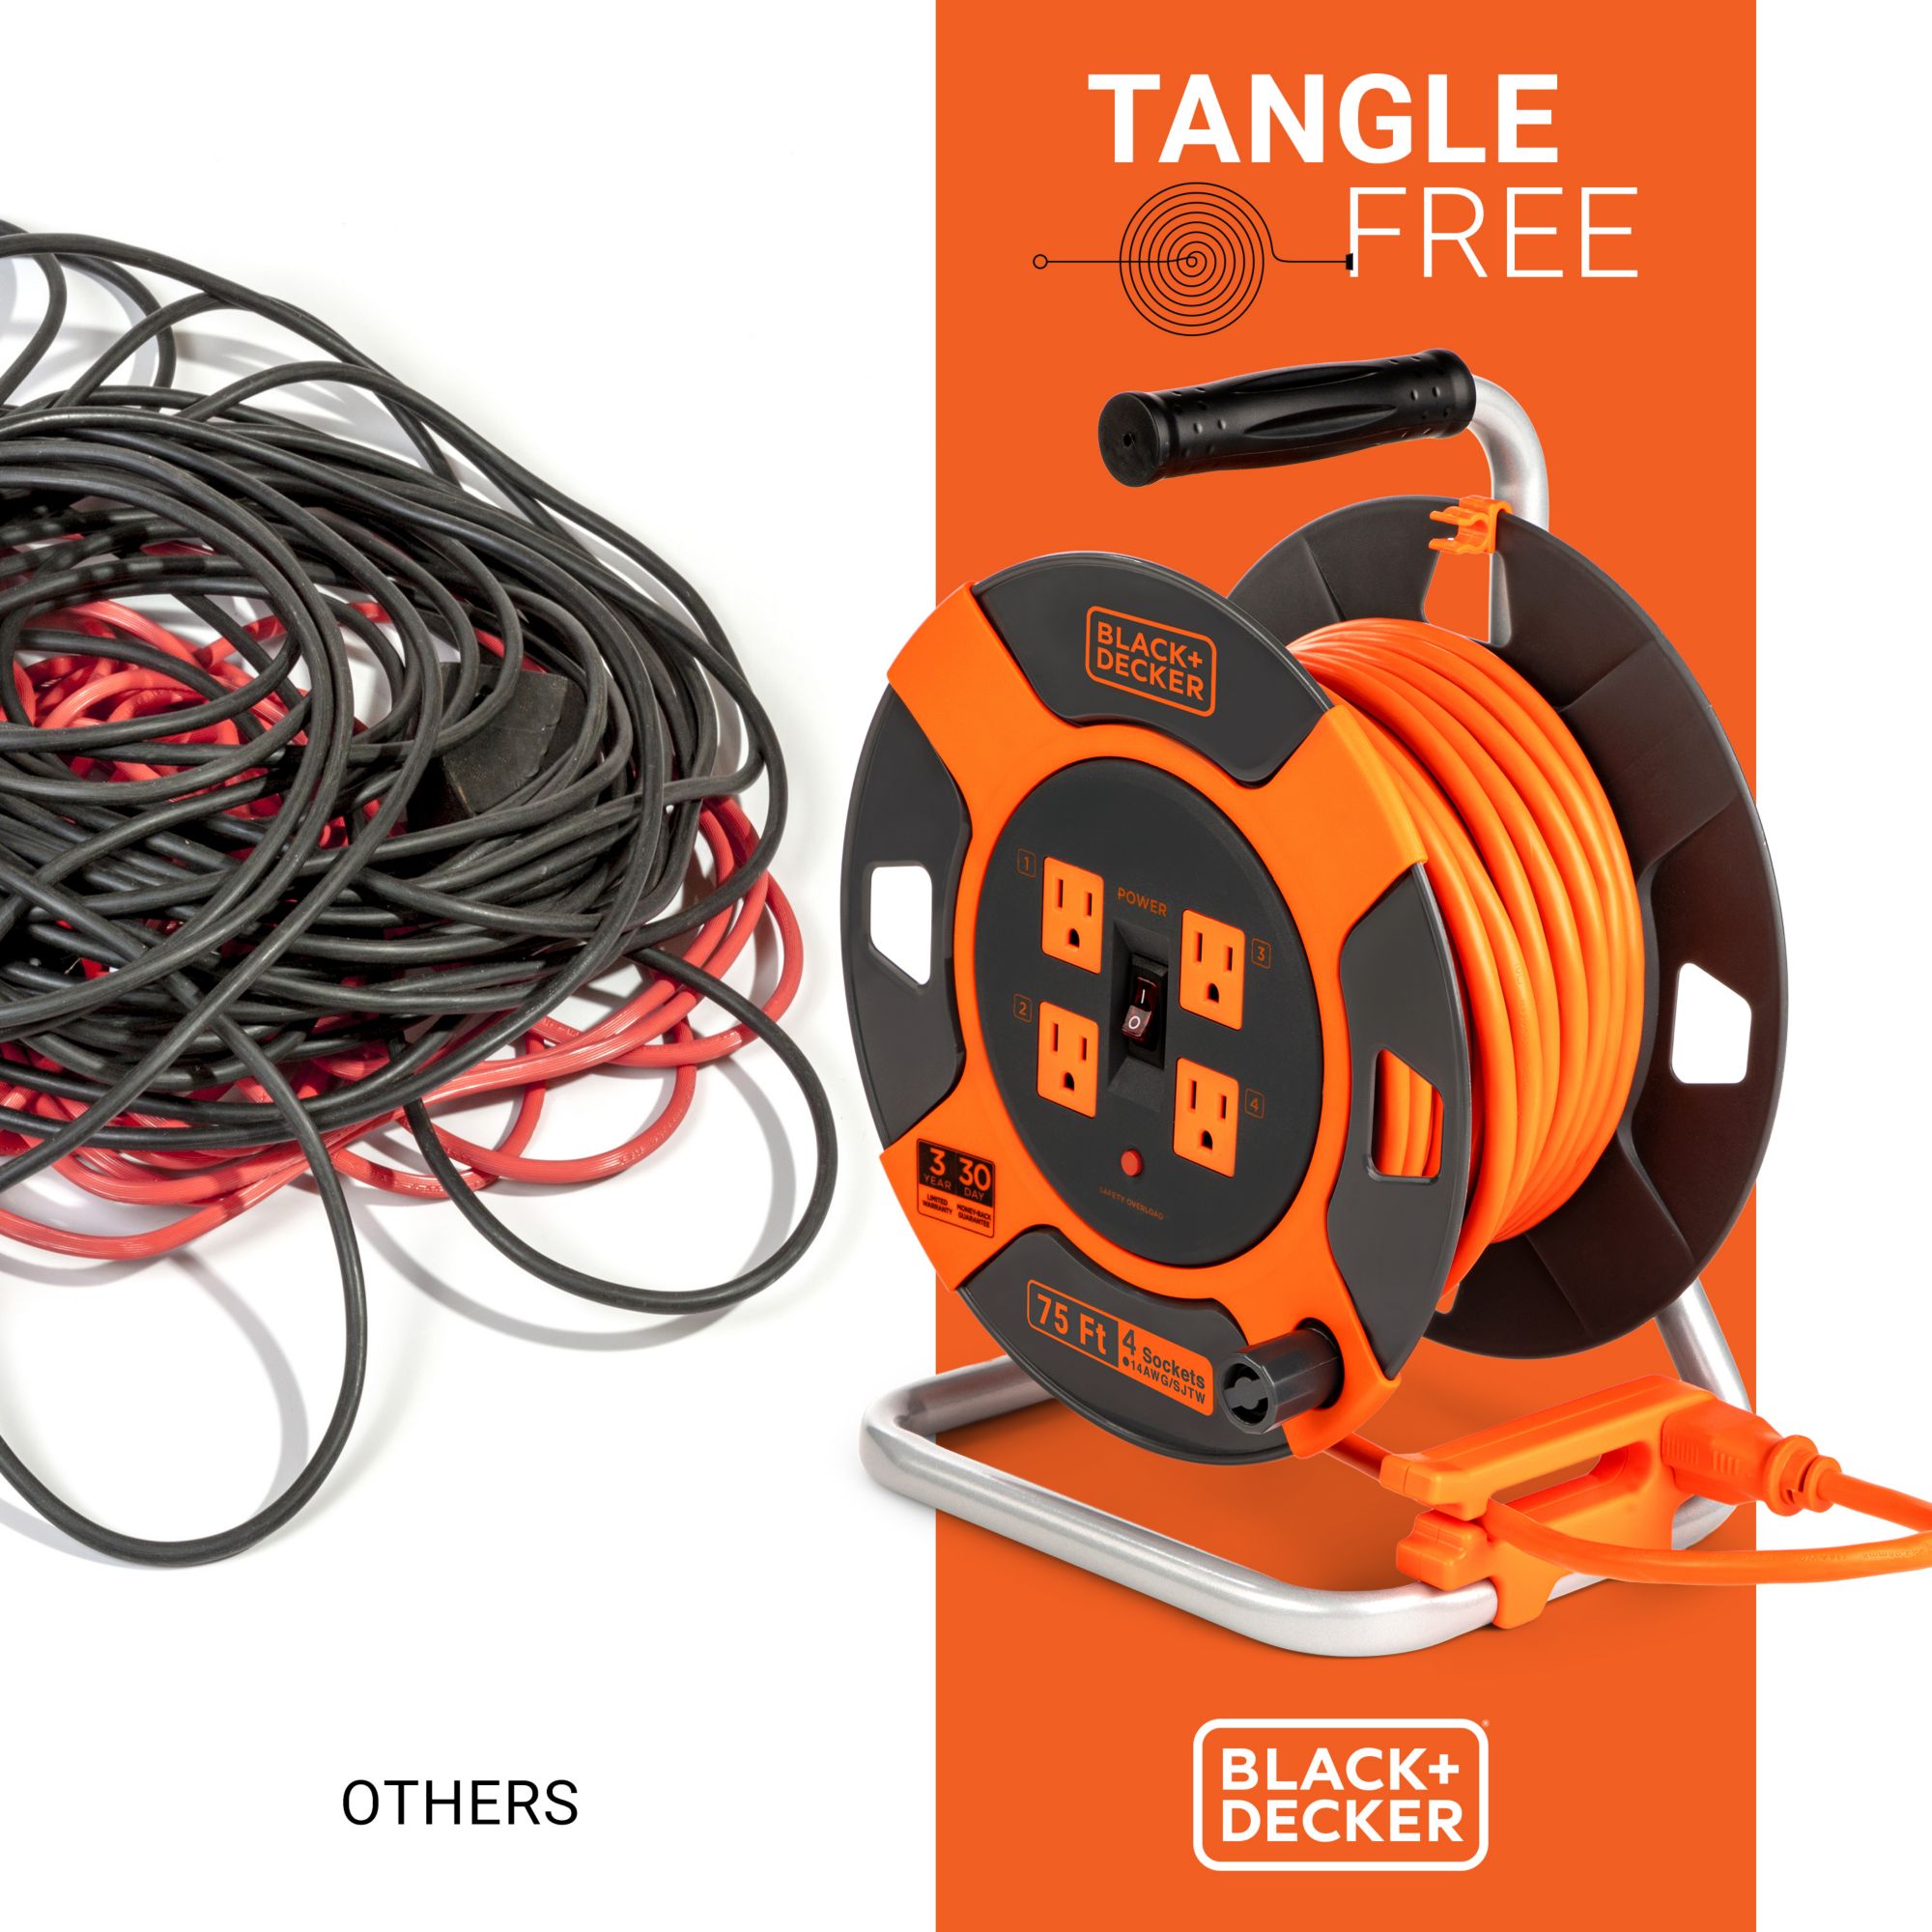 Black + Decker 75' Retractable Extension Cord Reel With 4 Outlets and  Multi-Plug Extension